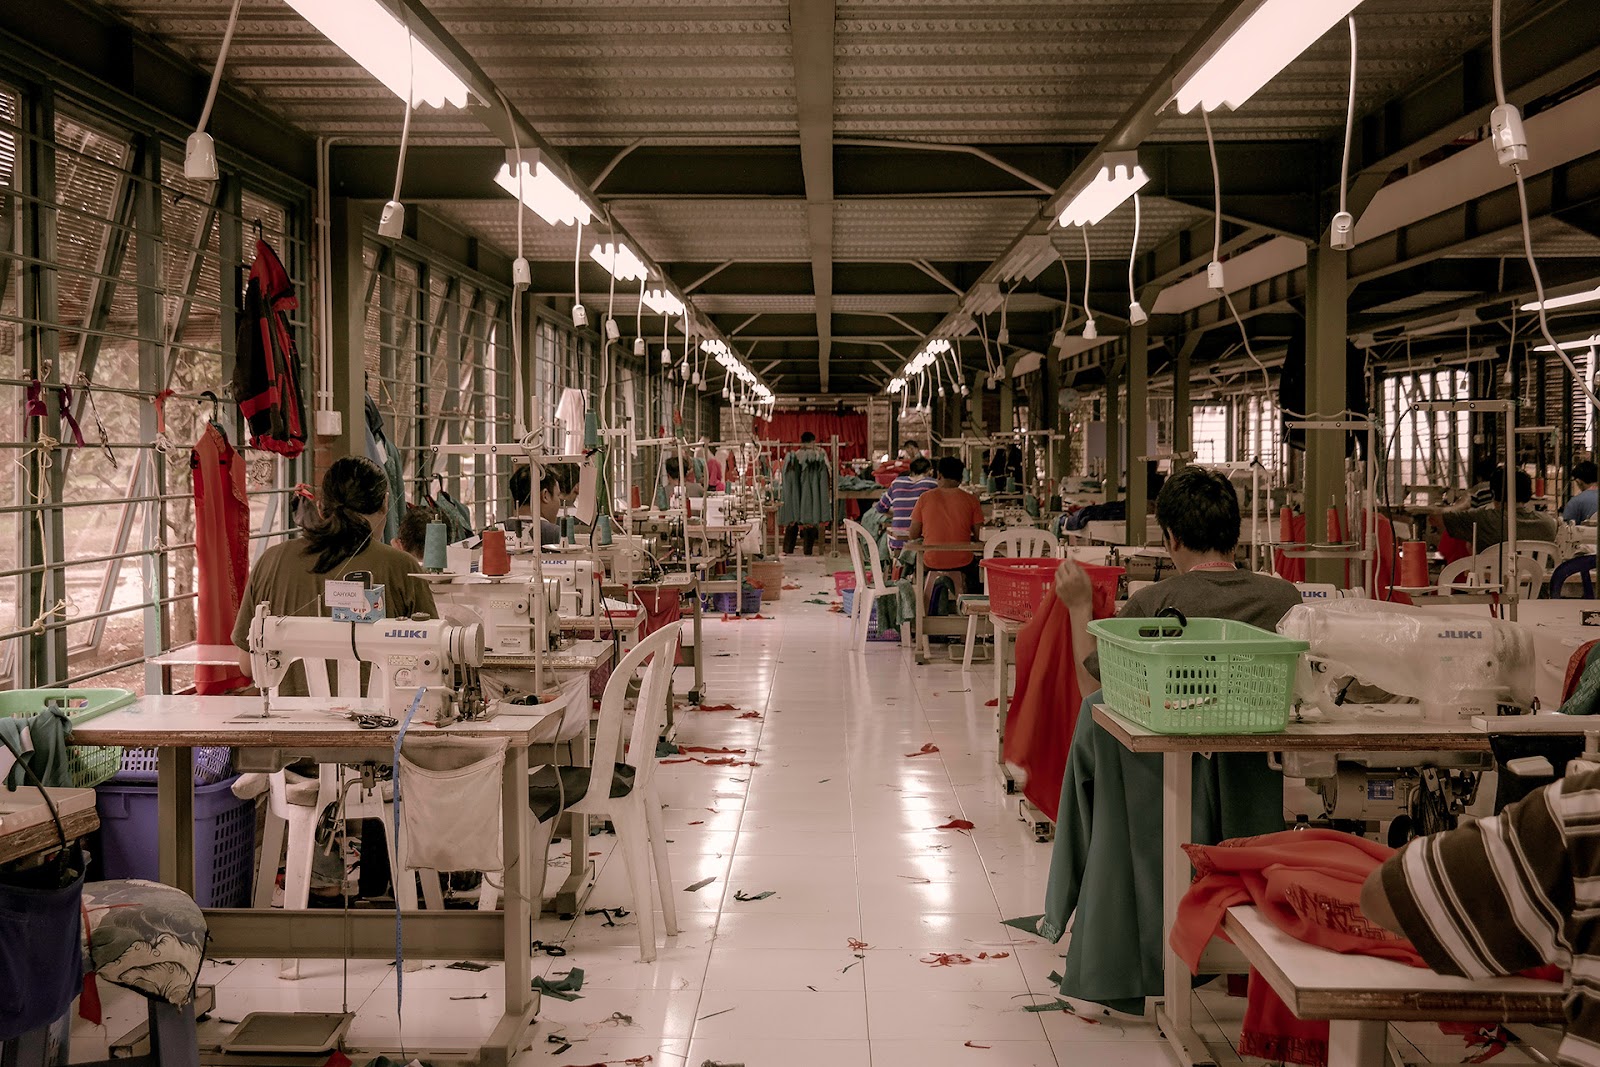 A Fashion Workshop with garment workers